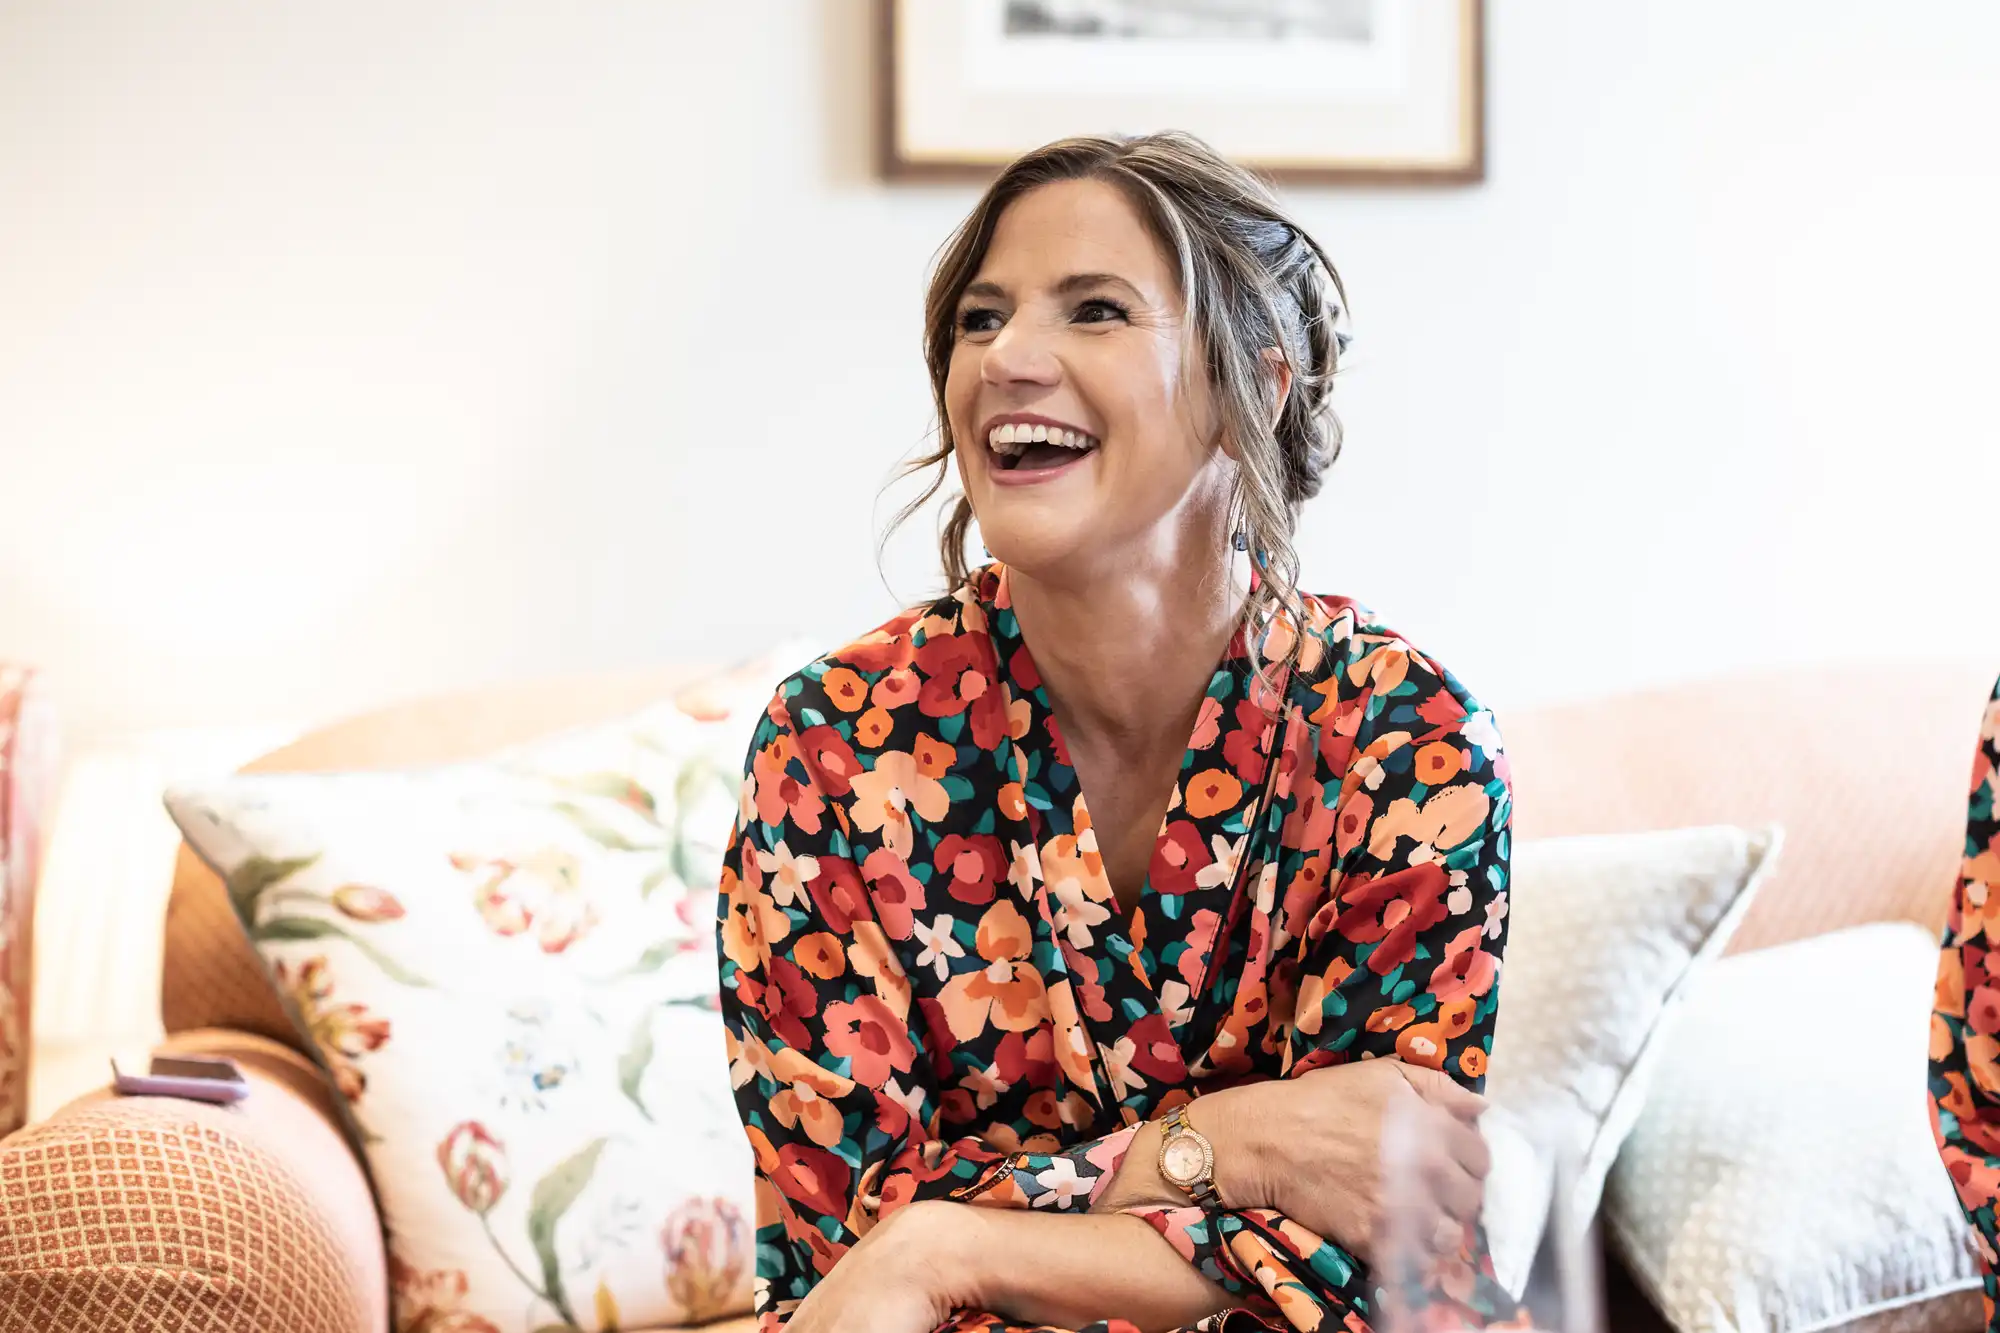 A woman in a floral dress laughs joyfully, sitting on a couch in a warmly lit living room.